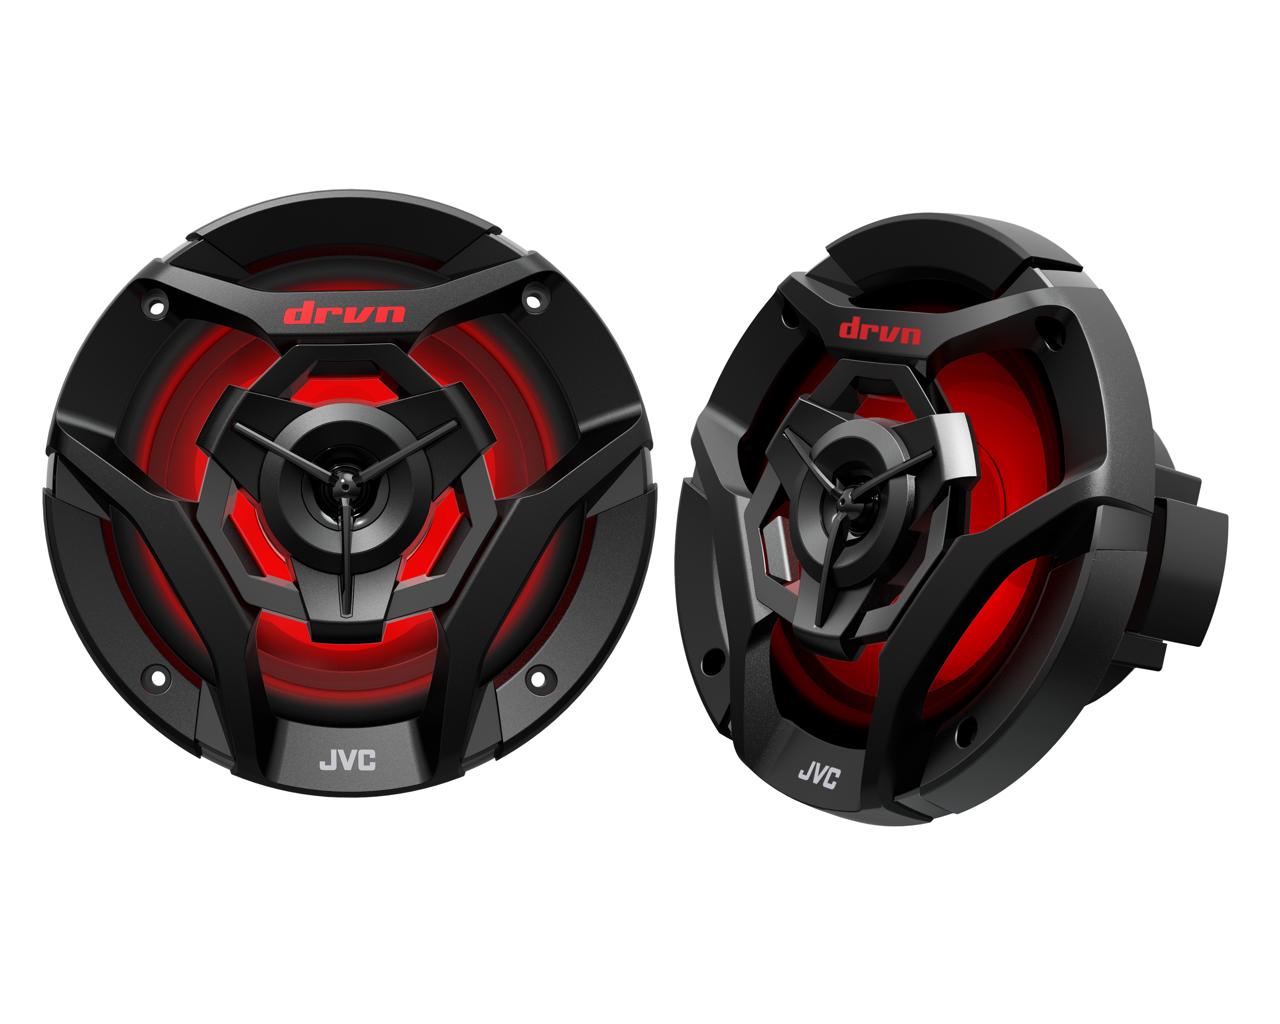 JVC CS-DR620MBL 6.5inch 2-Way Coaxial Speakers featuring 21-color LED Illumination / Water Resistant (IPX5) / UV Resistant Woofers / Peak Power 260W / RMS Power 75W